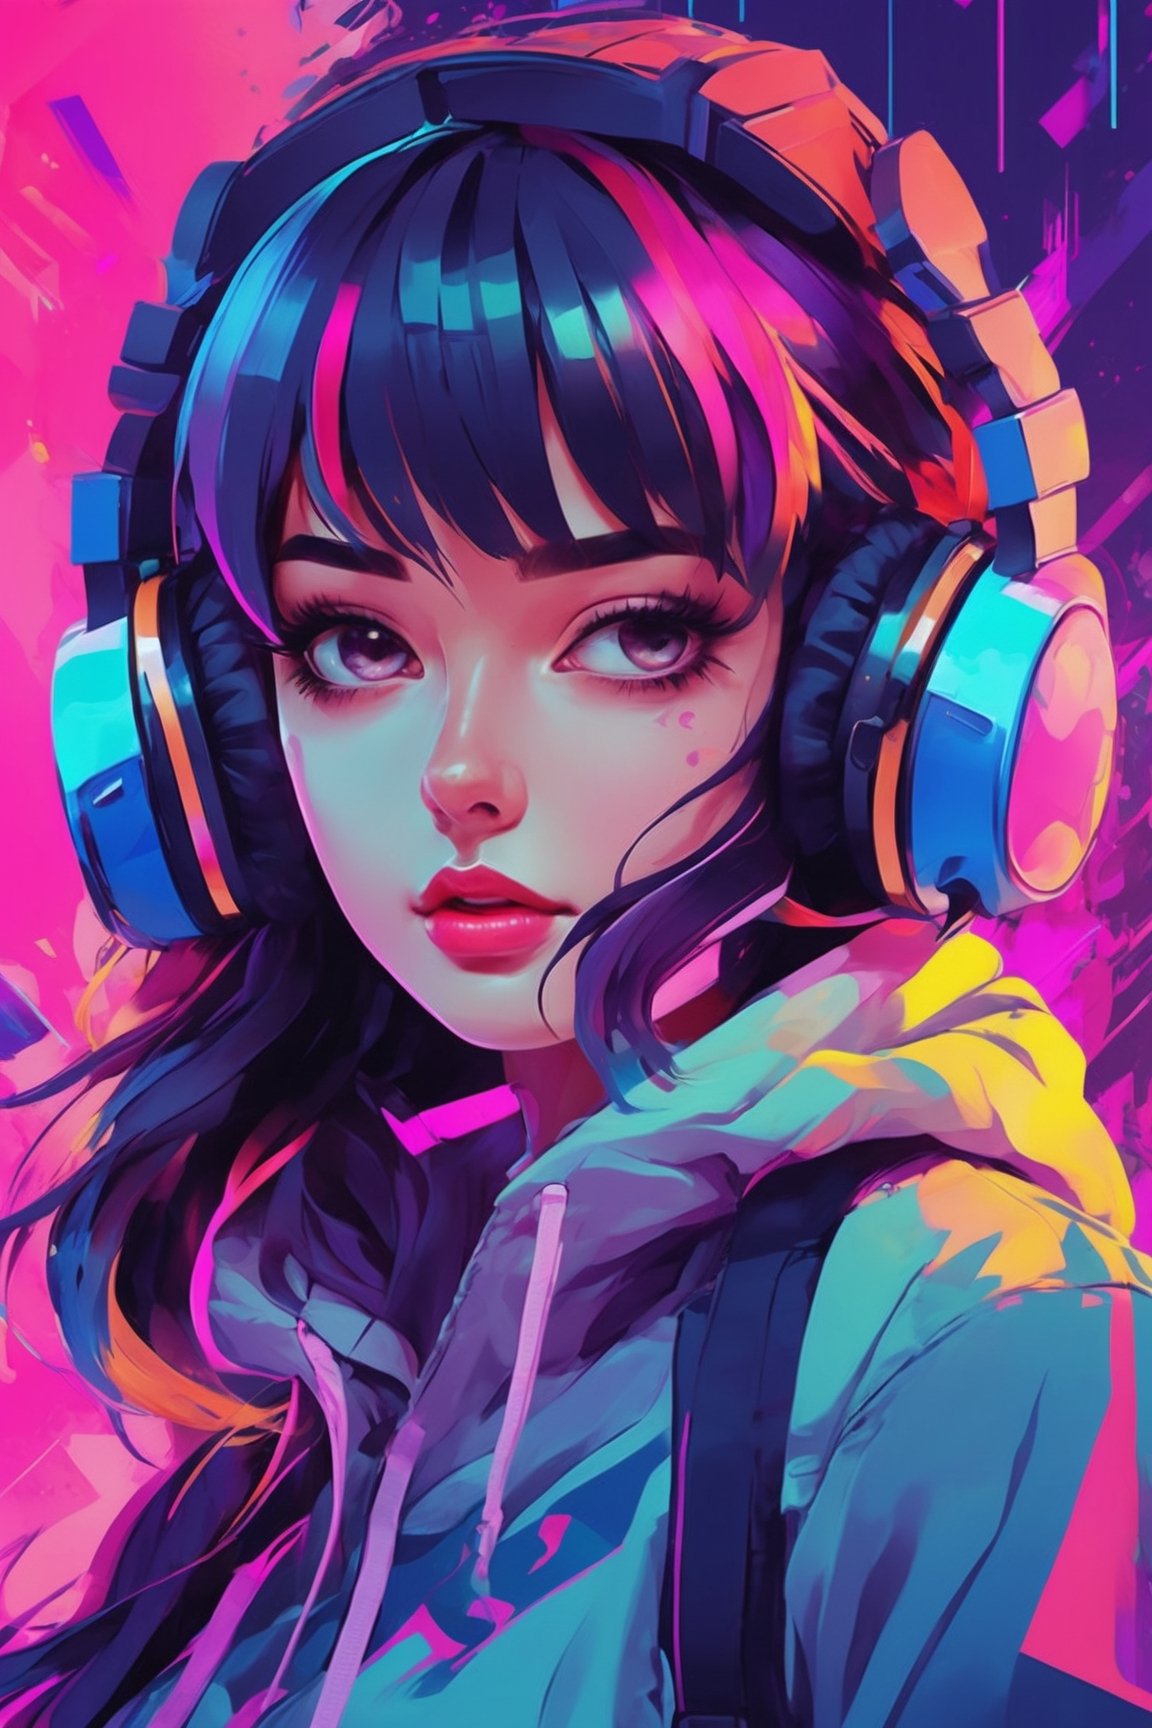 Glitchcore Art Style, of a gamer girl, dynamic, dramatic, distorted, vibrant colors, glitchcore art style